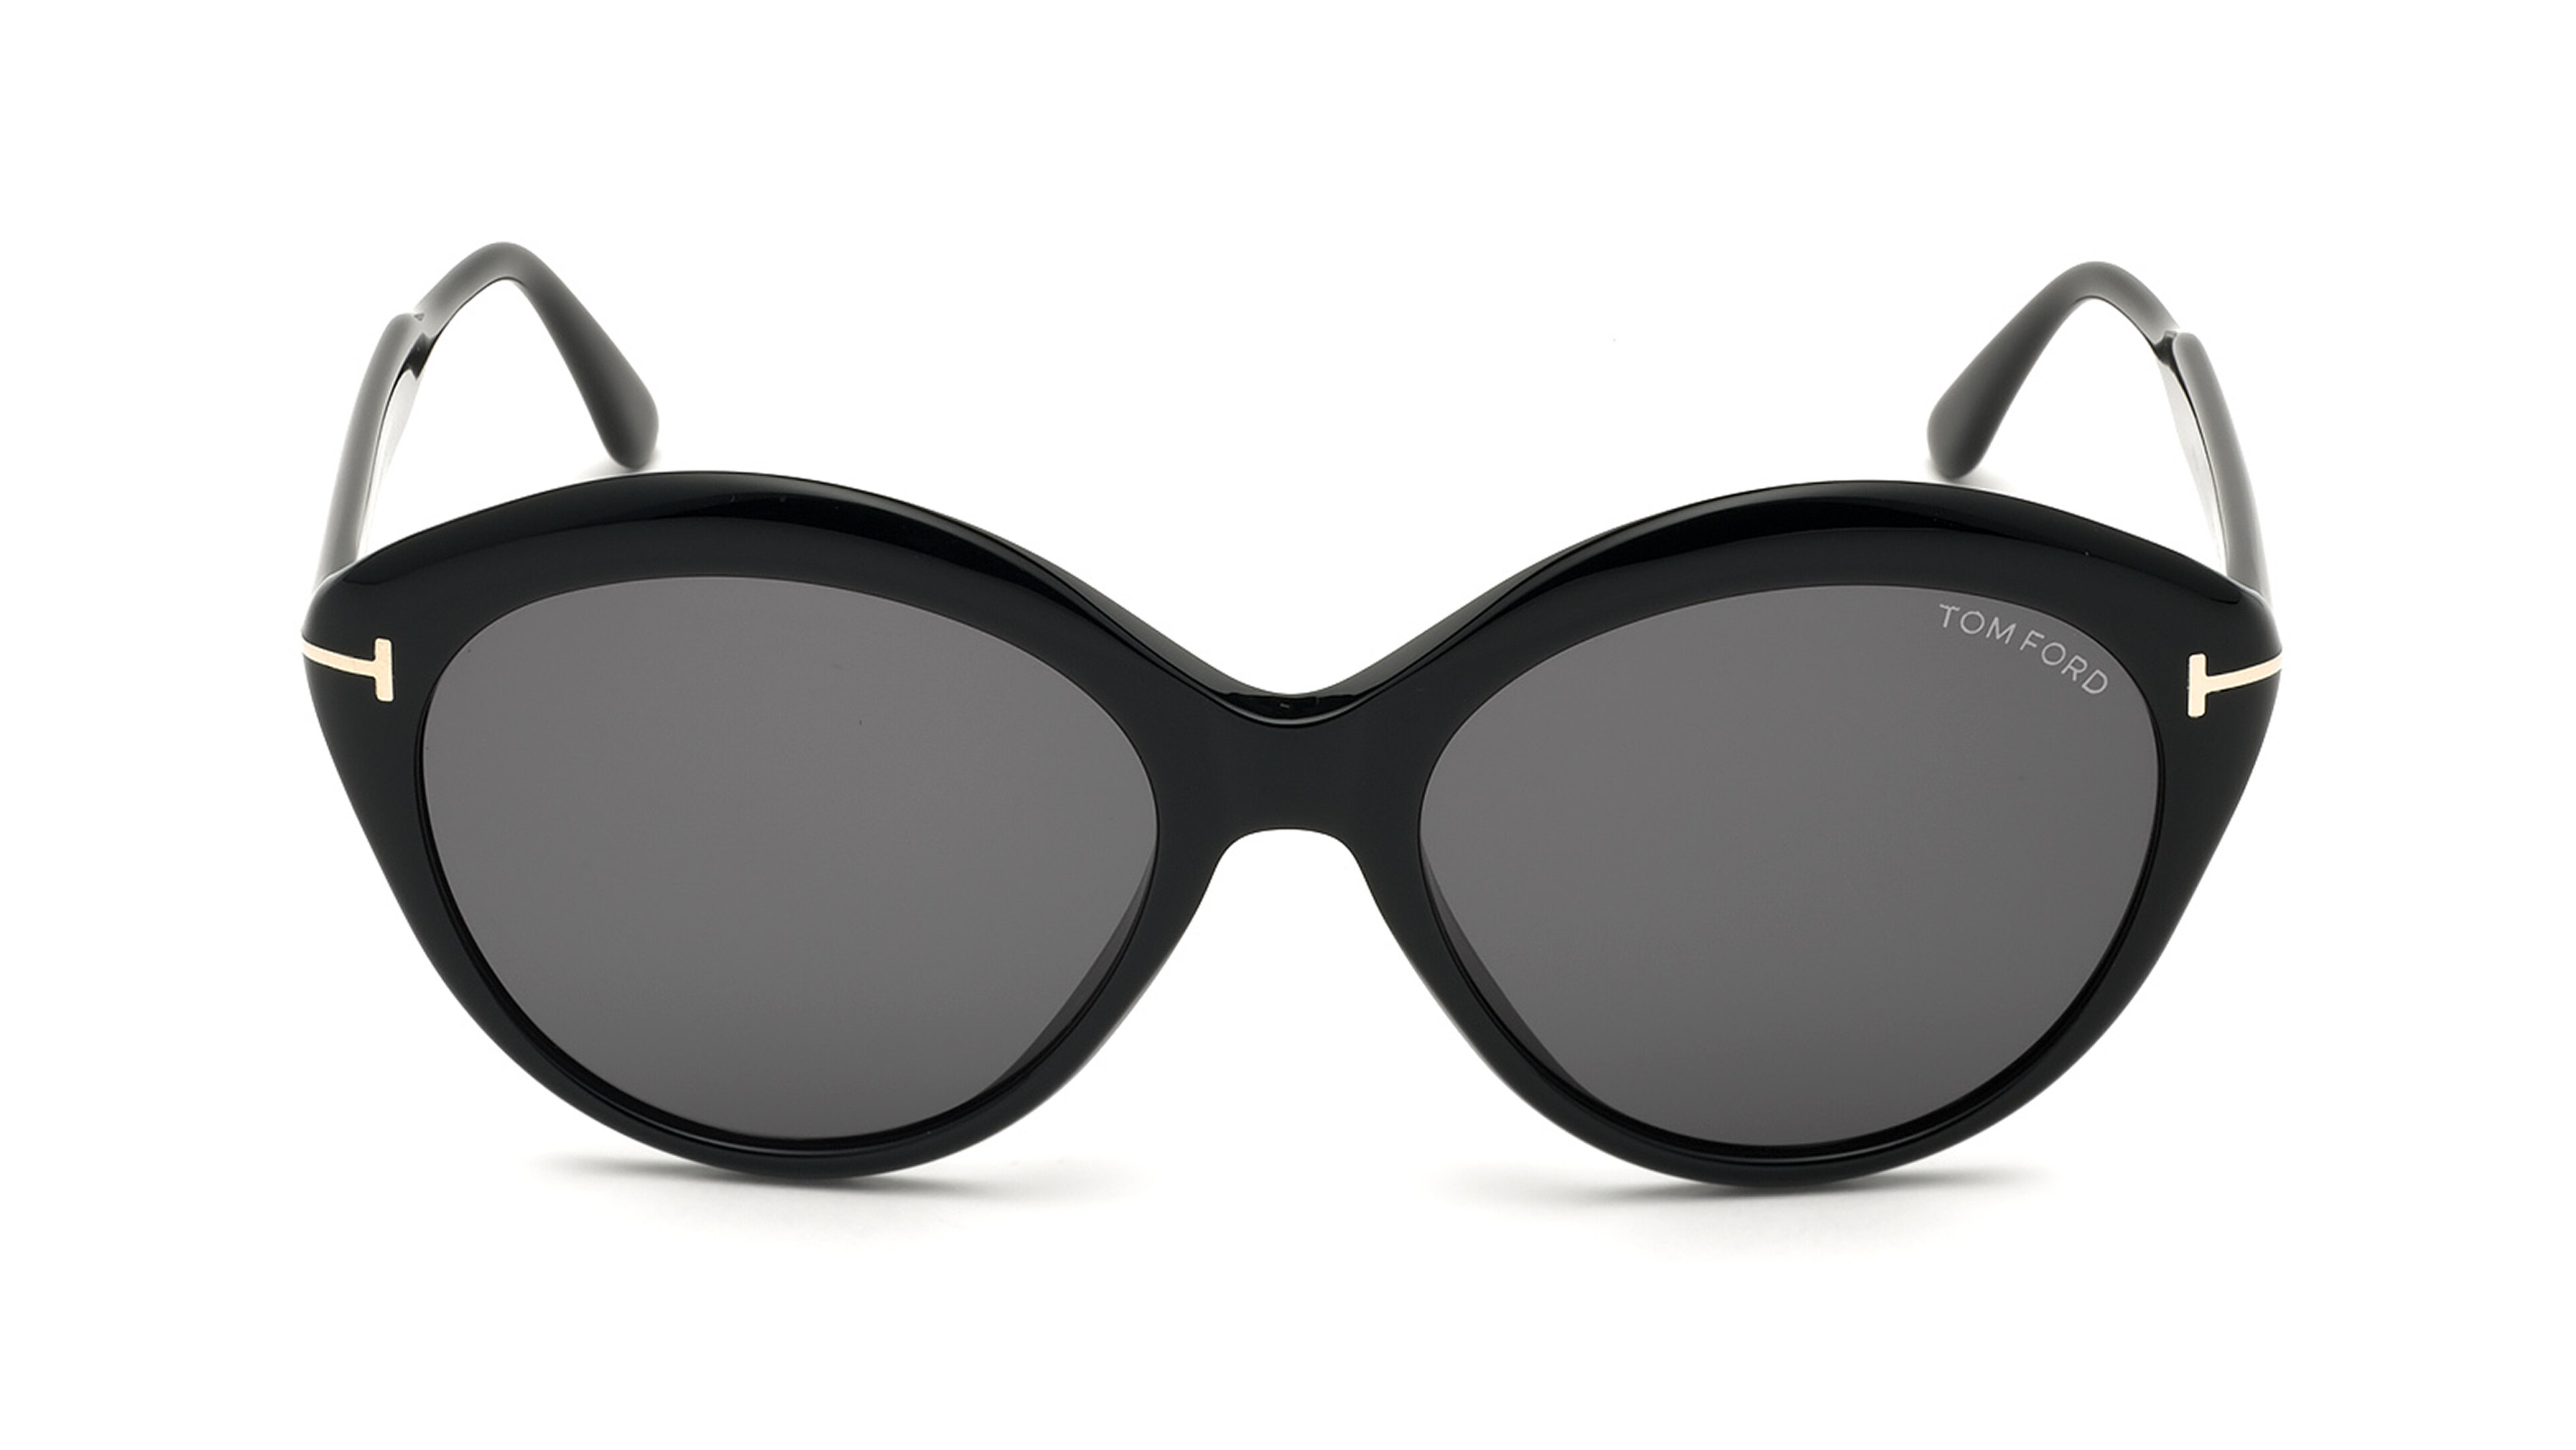 [products.image.front] Tom Ford FT0763 01A Sonnenbrille